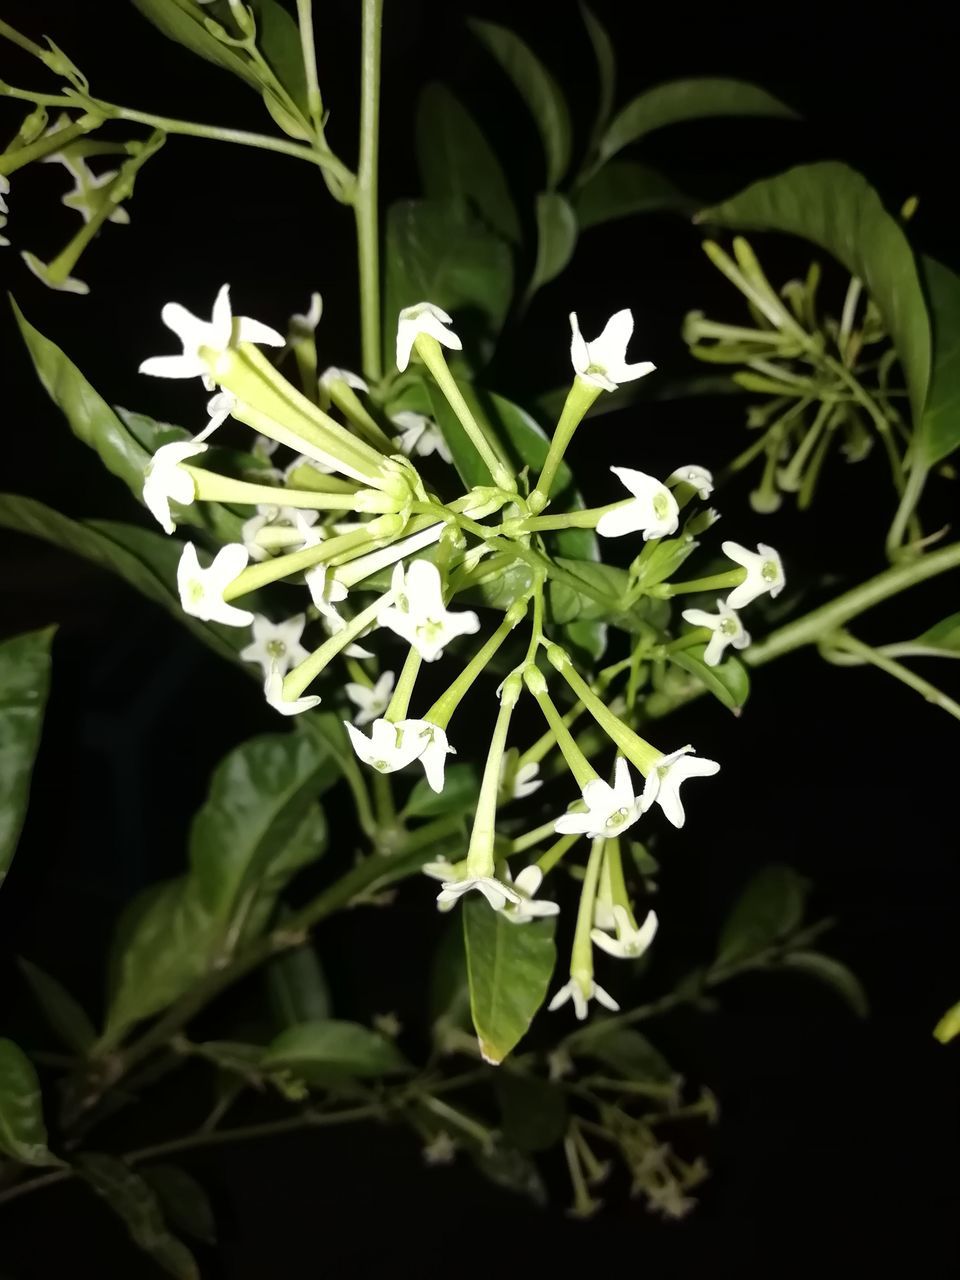 CLOSE-UP OF WHITE FLOWERING PLANTS AGAINST BLACK BACKGROUND